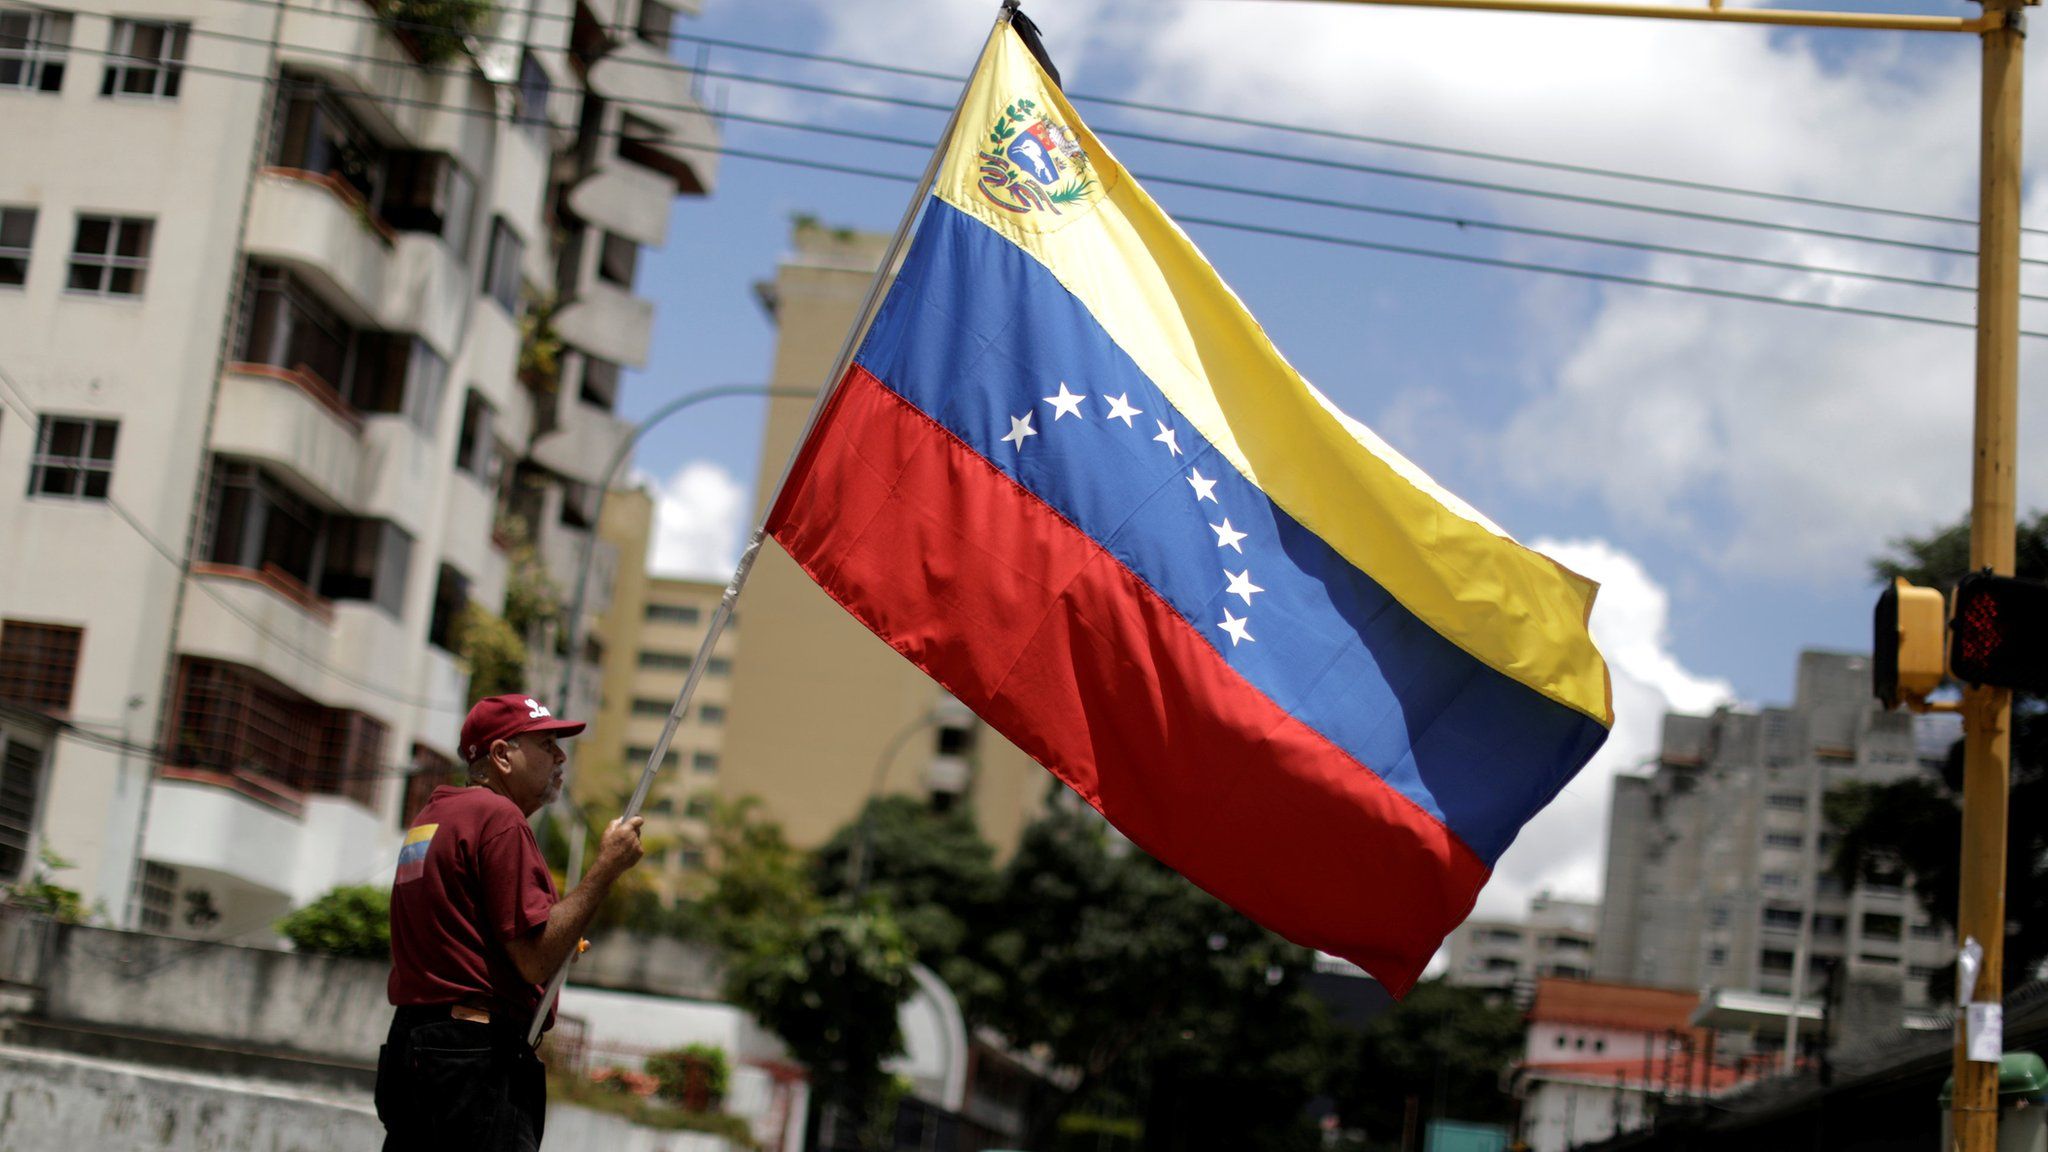 A man with a Venezuelan flag stands in a street after a strike called to protest against Venezuelan President Nicolas Maduro's government in Caracas, Venezuela, July 29, 2017